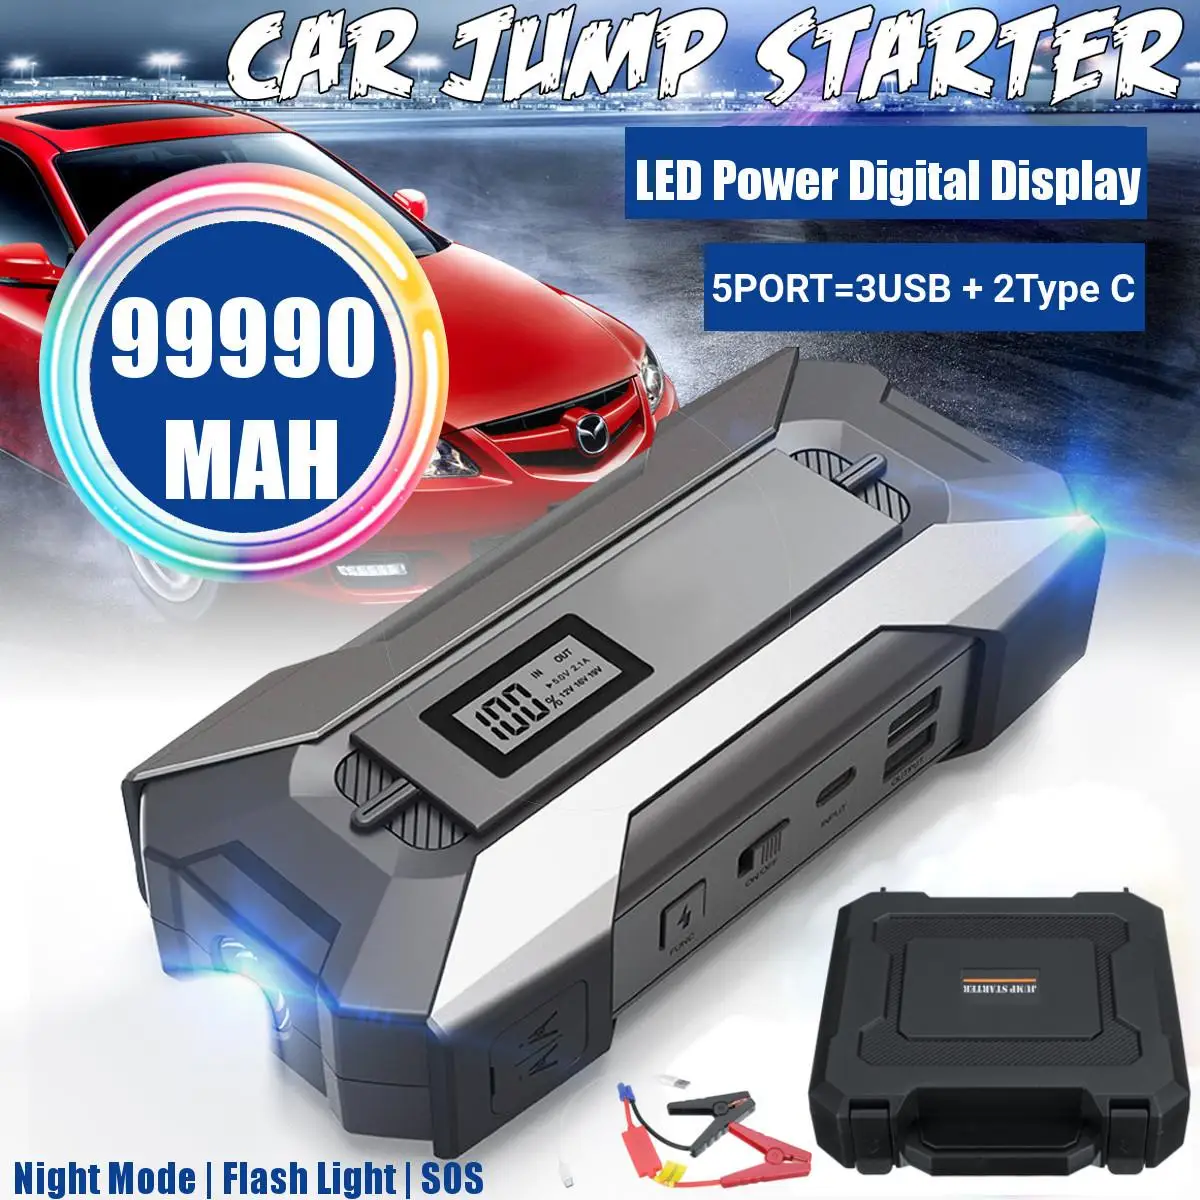 Car Jump Starter Power Bank A11 Display Screen 12V Starting Device Portable Emergency Car Booster Auto Car Battery Charger